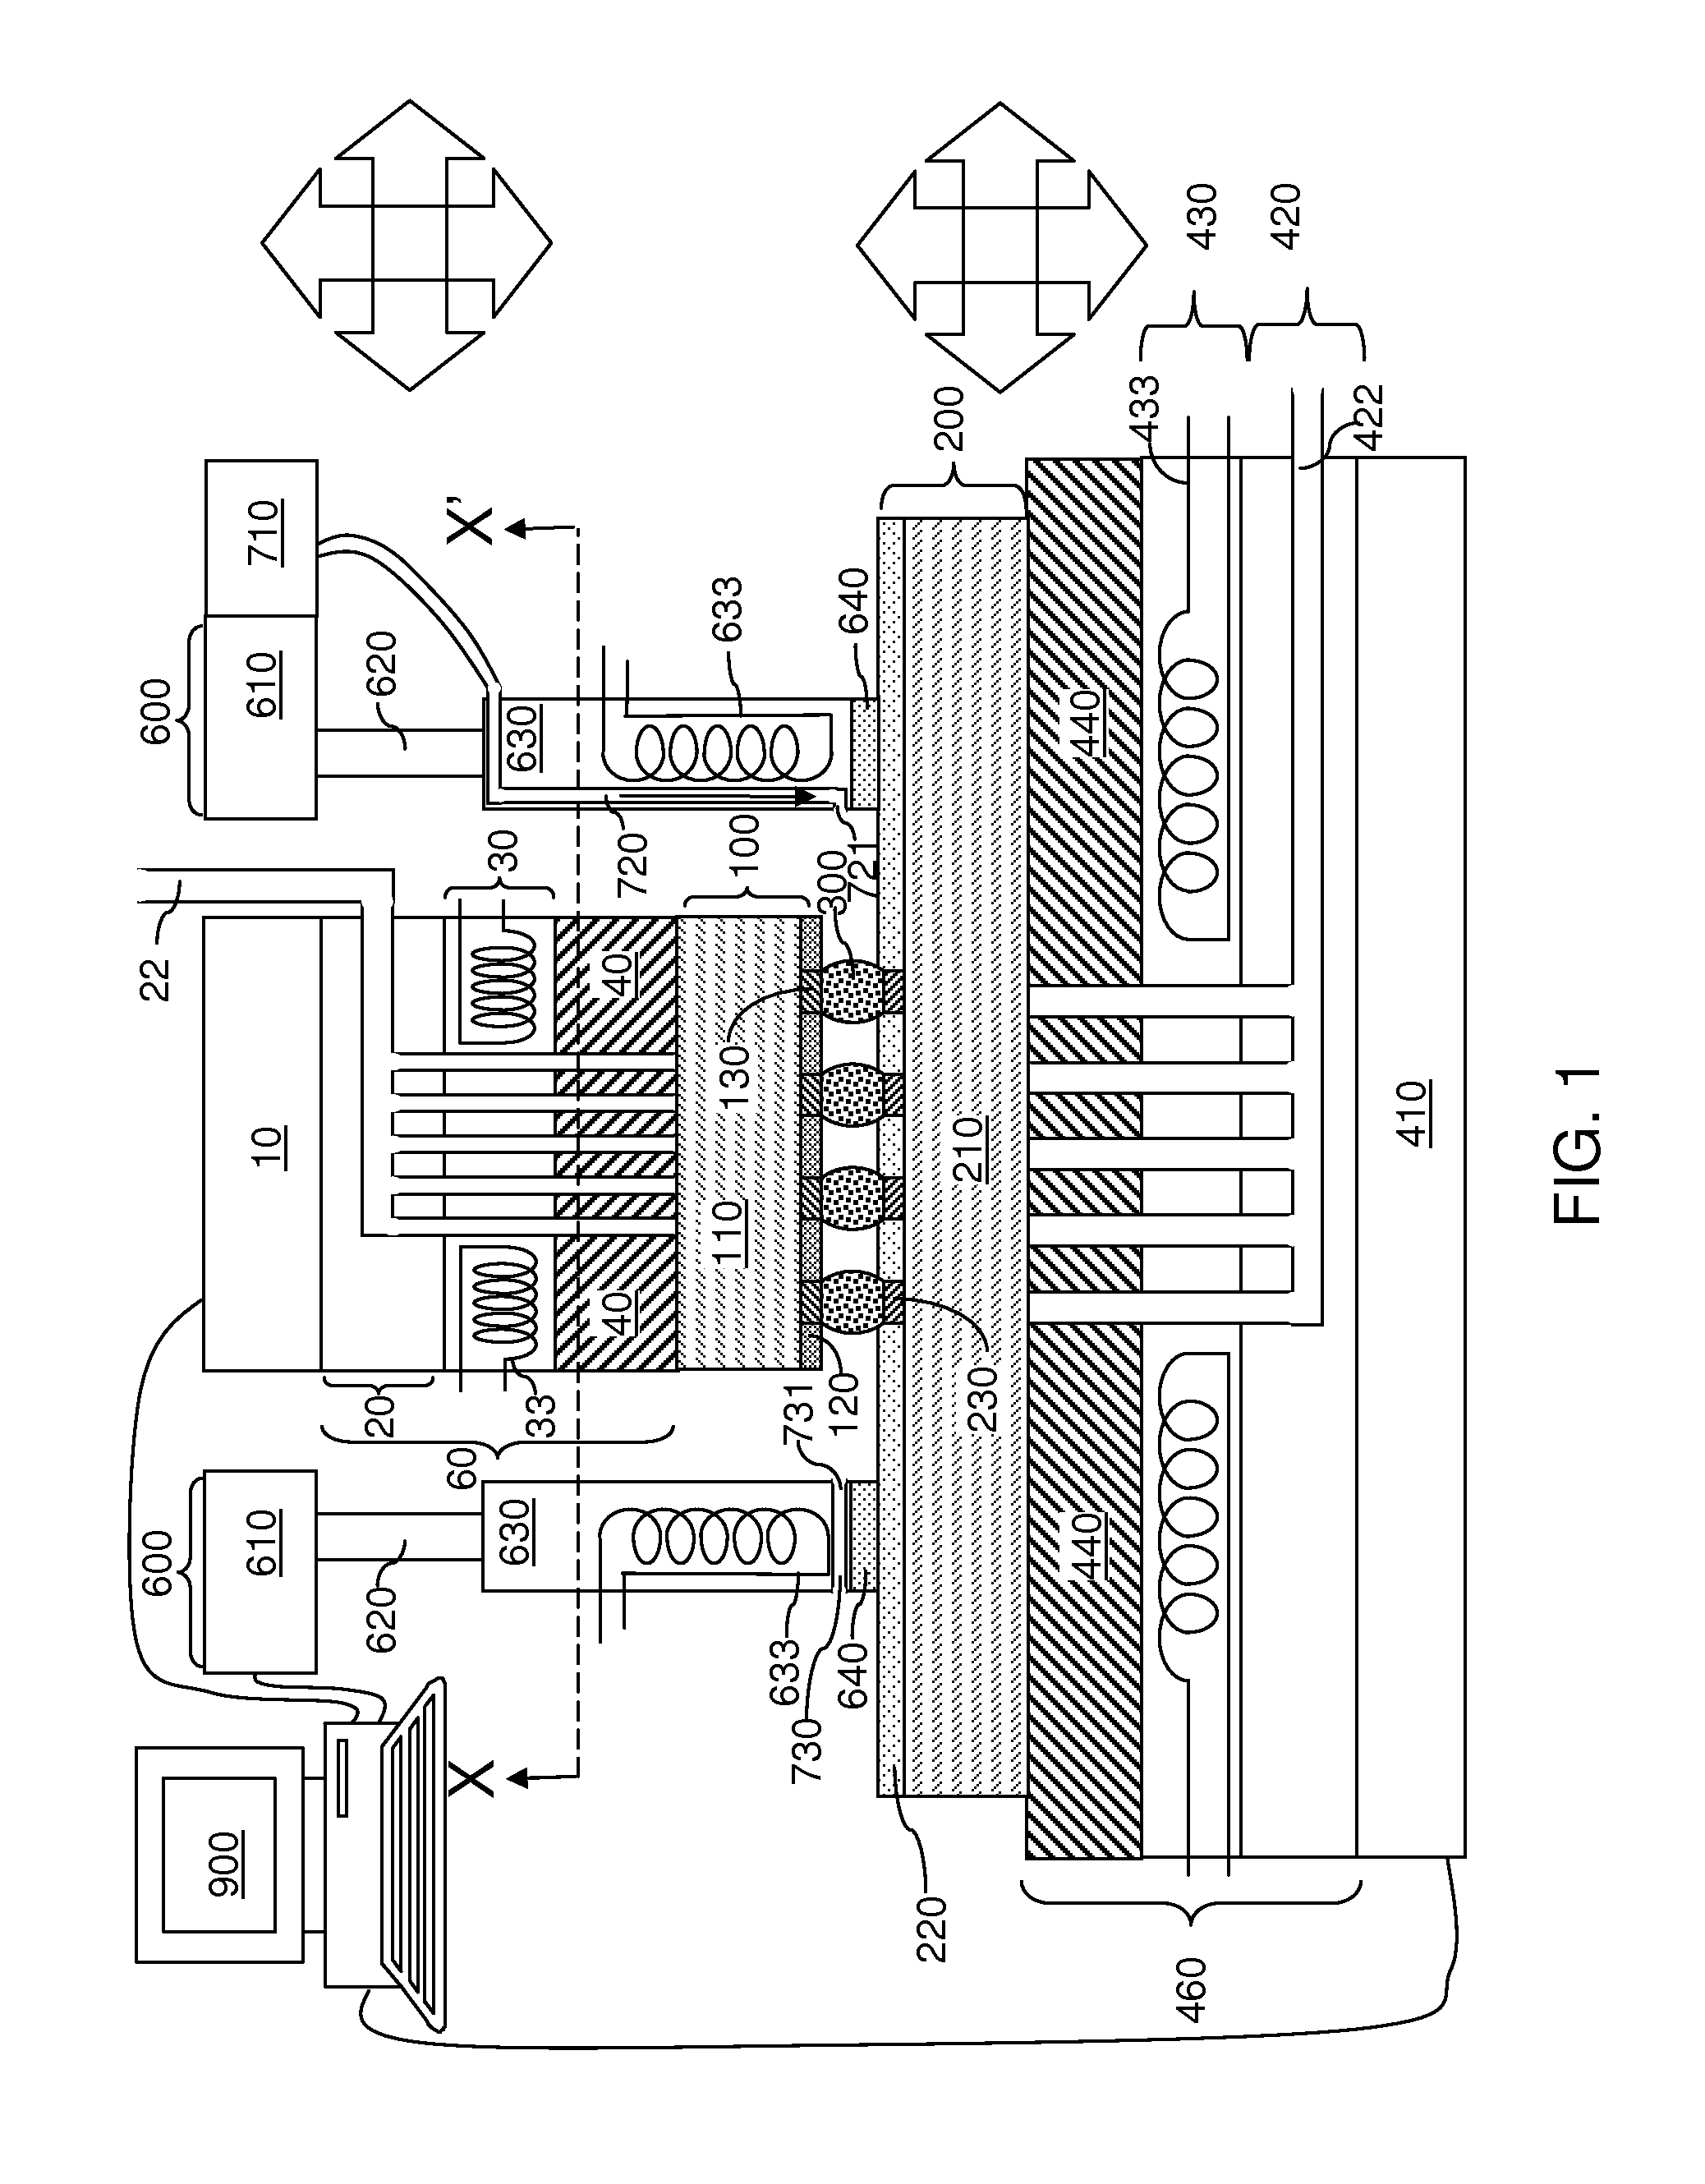 Flip chip assembly apparatus employing a warpage-suppressor assembly